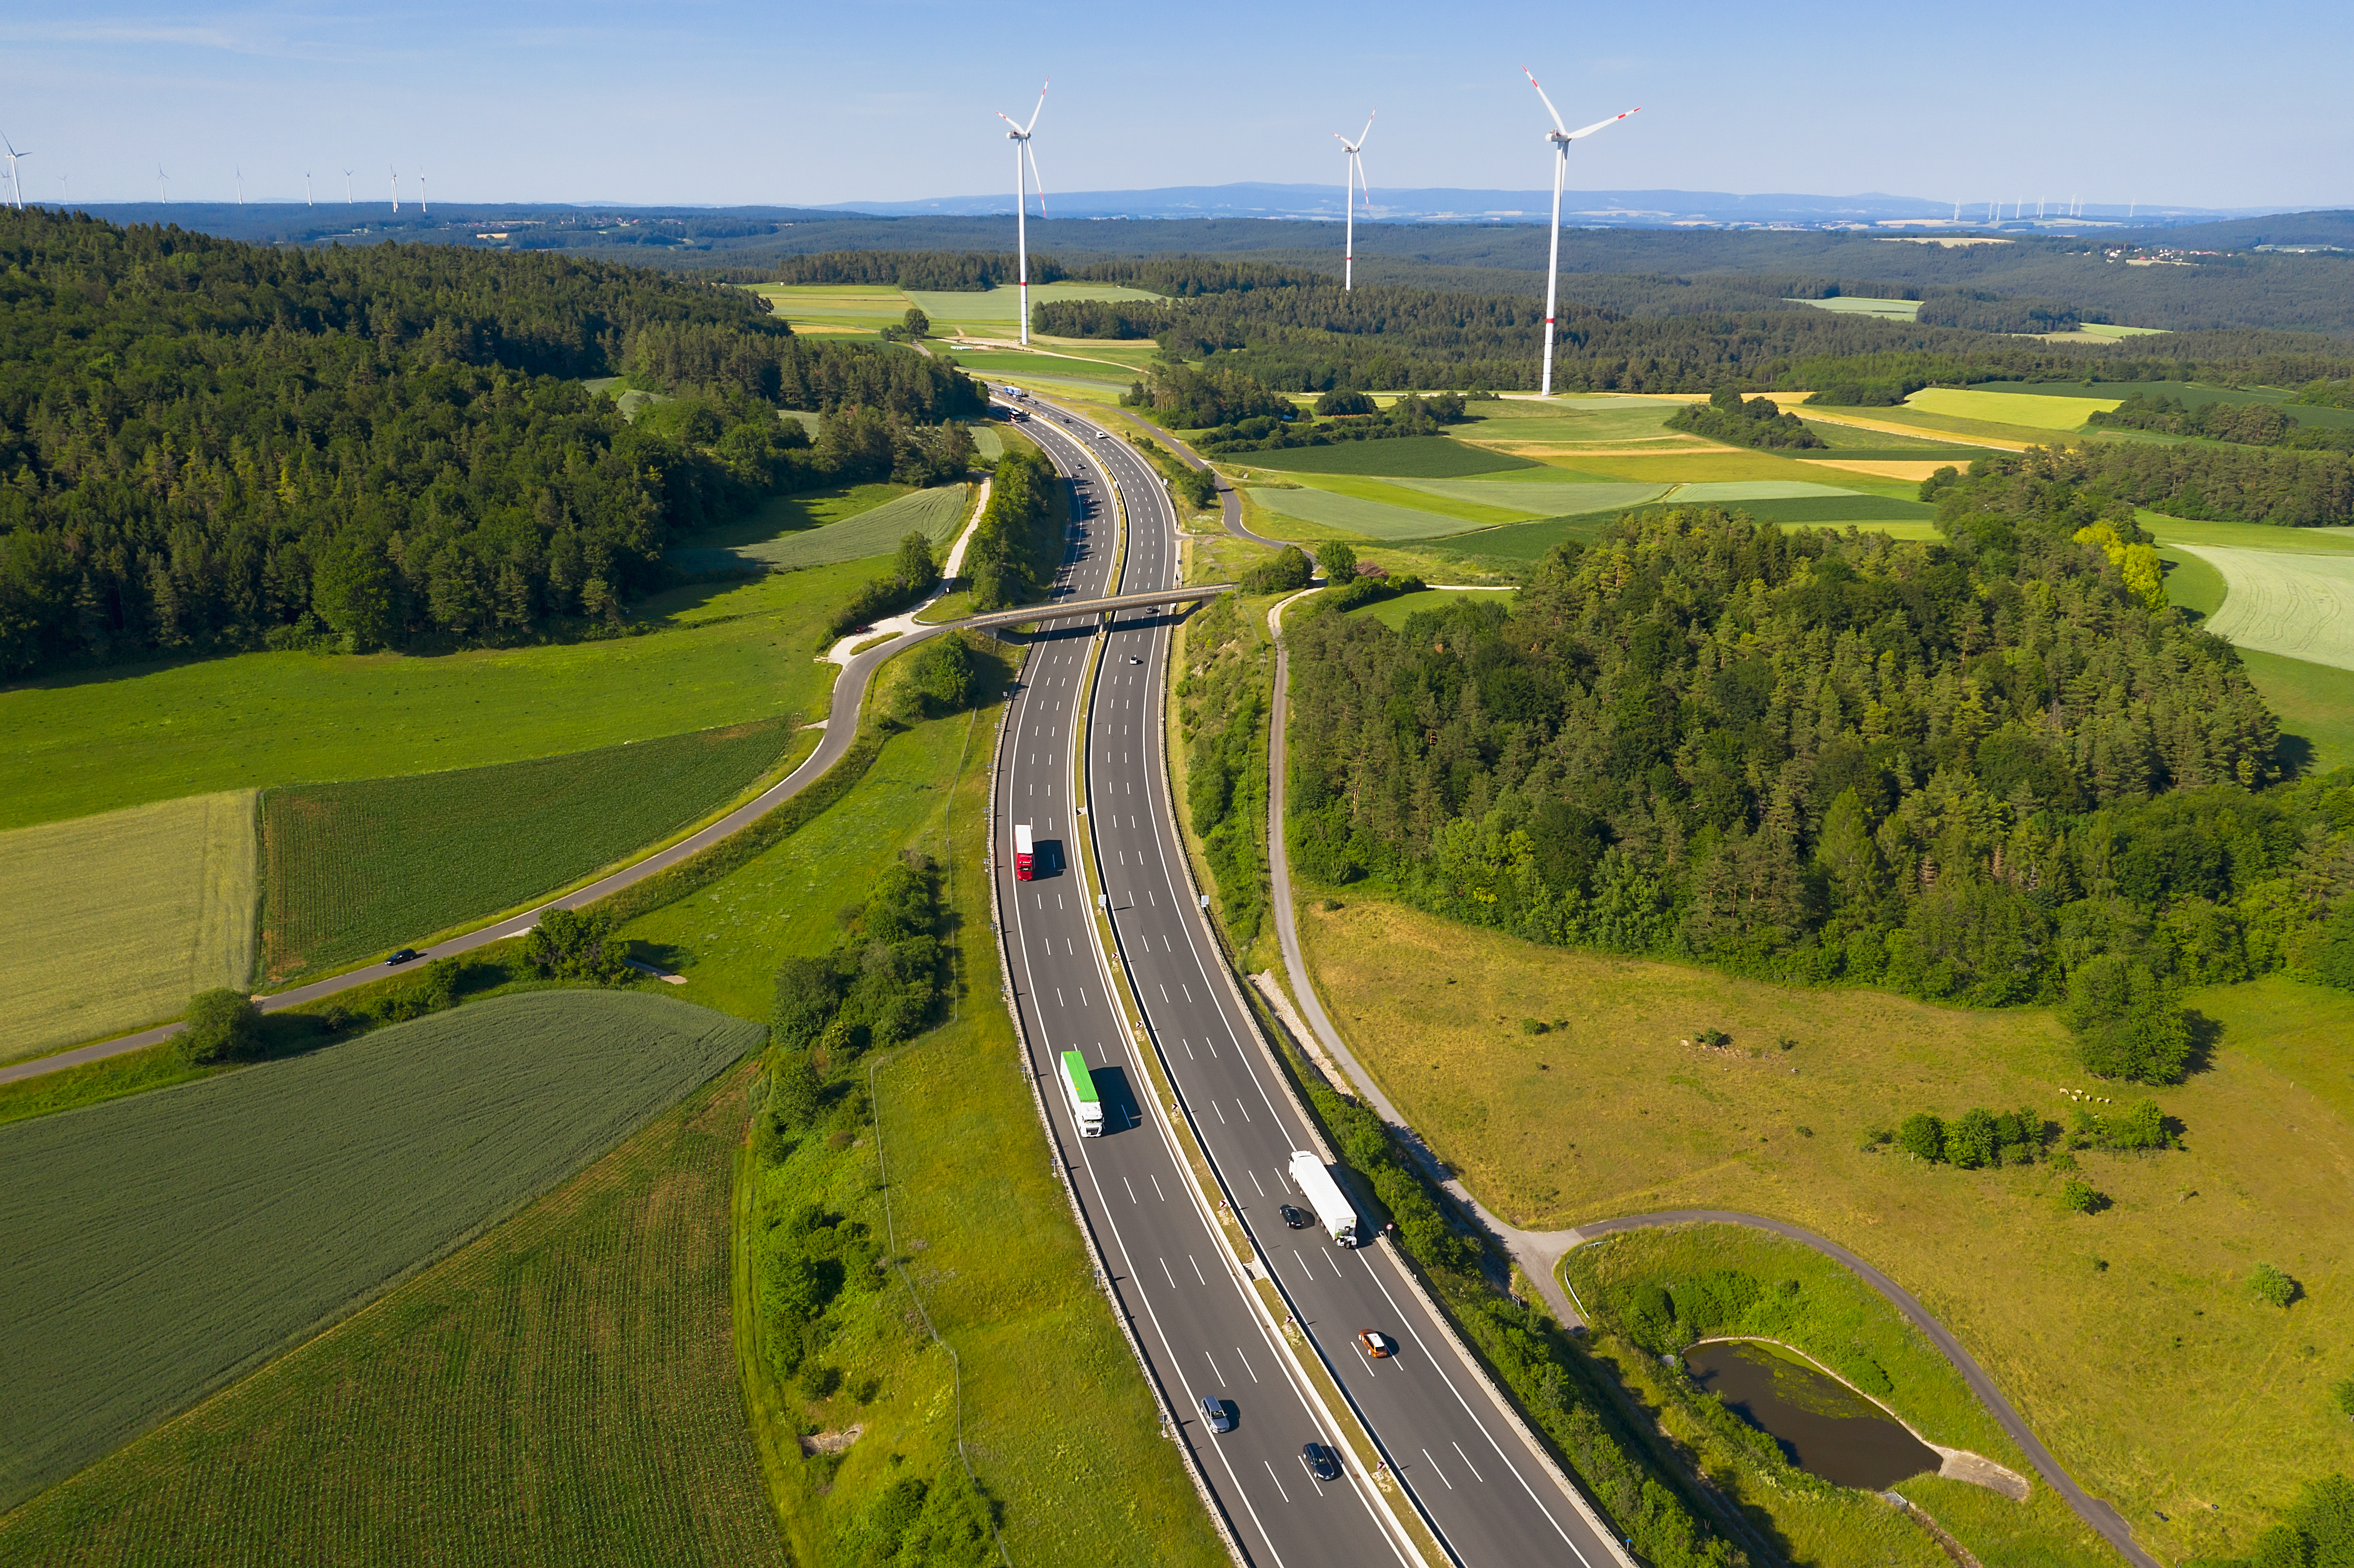 Trucks-on-the-autobahn-surrounded-by-wind-turbines.jpg